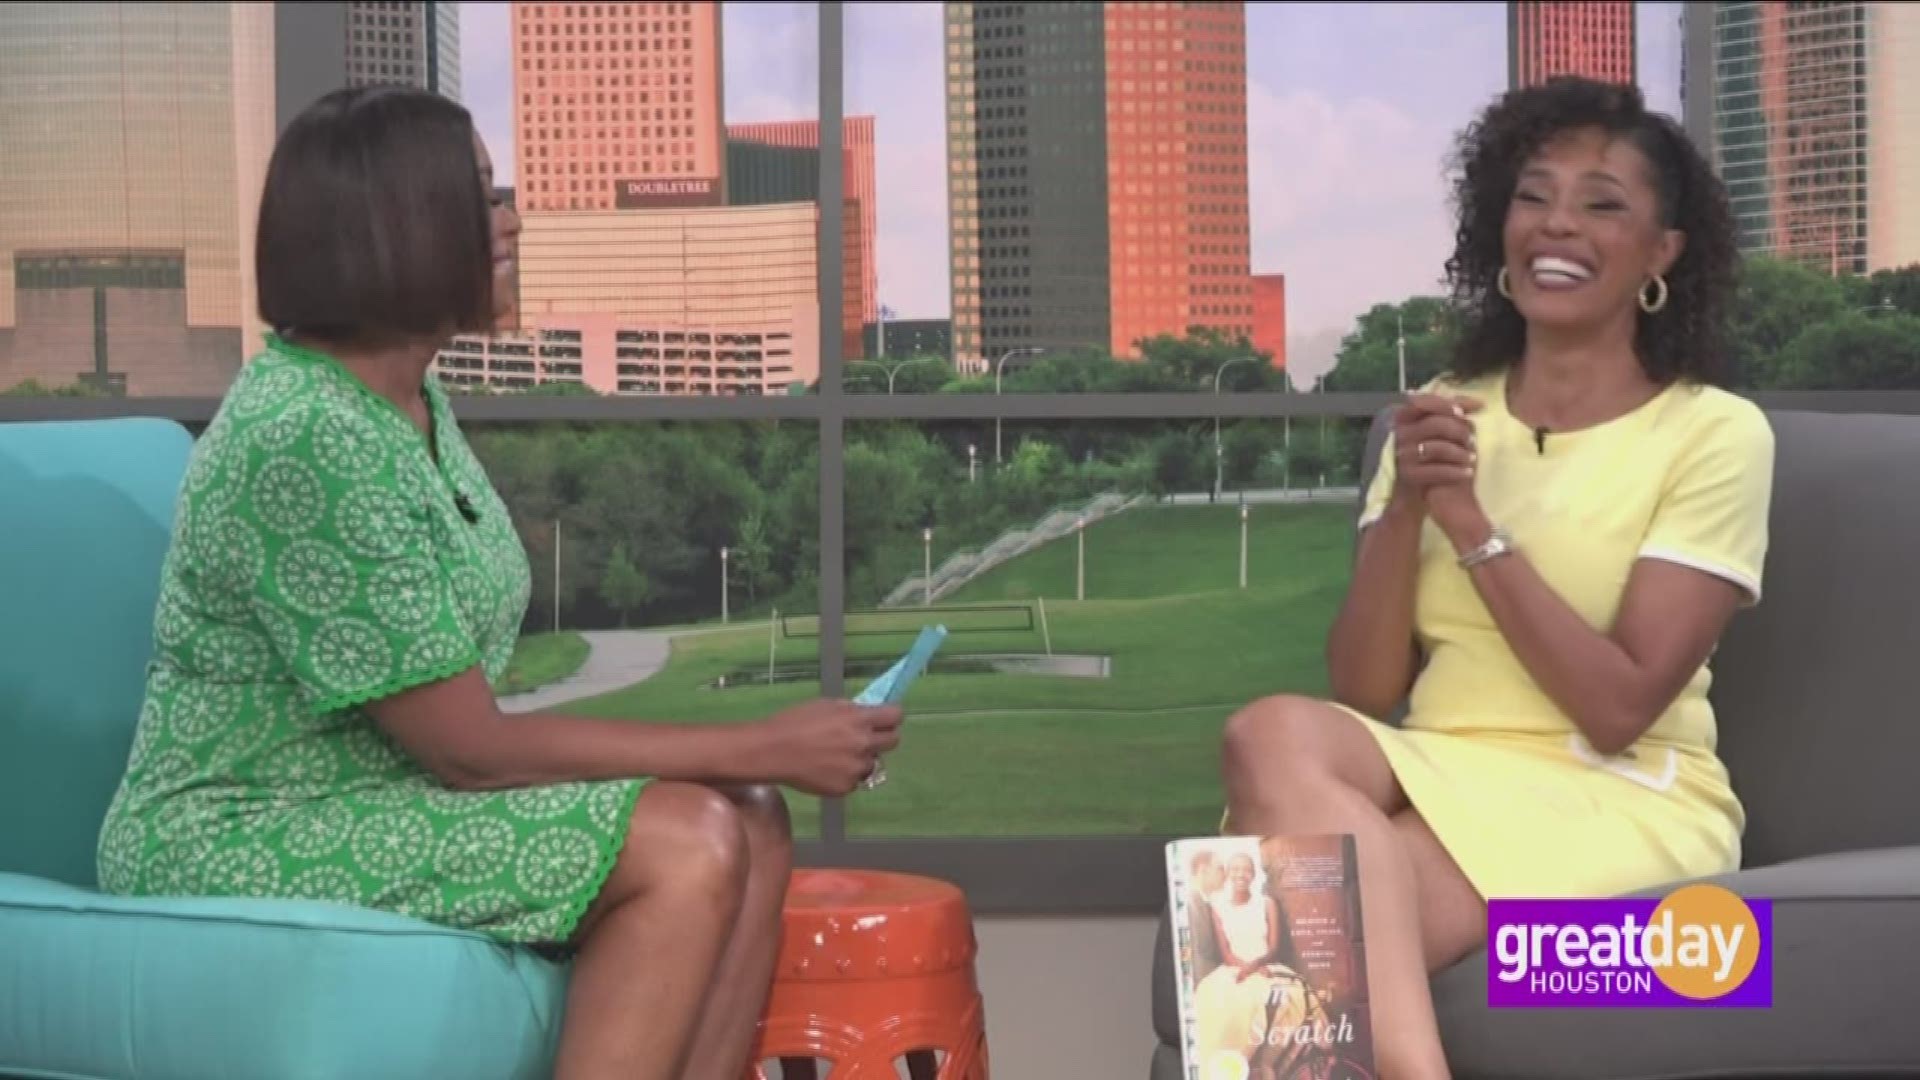 Actress Tembi Locke discusses her bestselling book titled "From Scratch: A Memoir of Love, Sicily, and Finding Home."